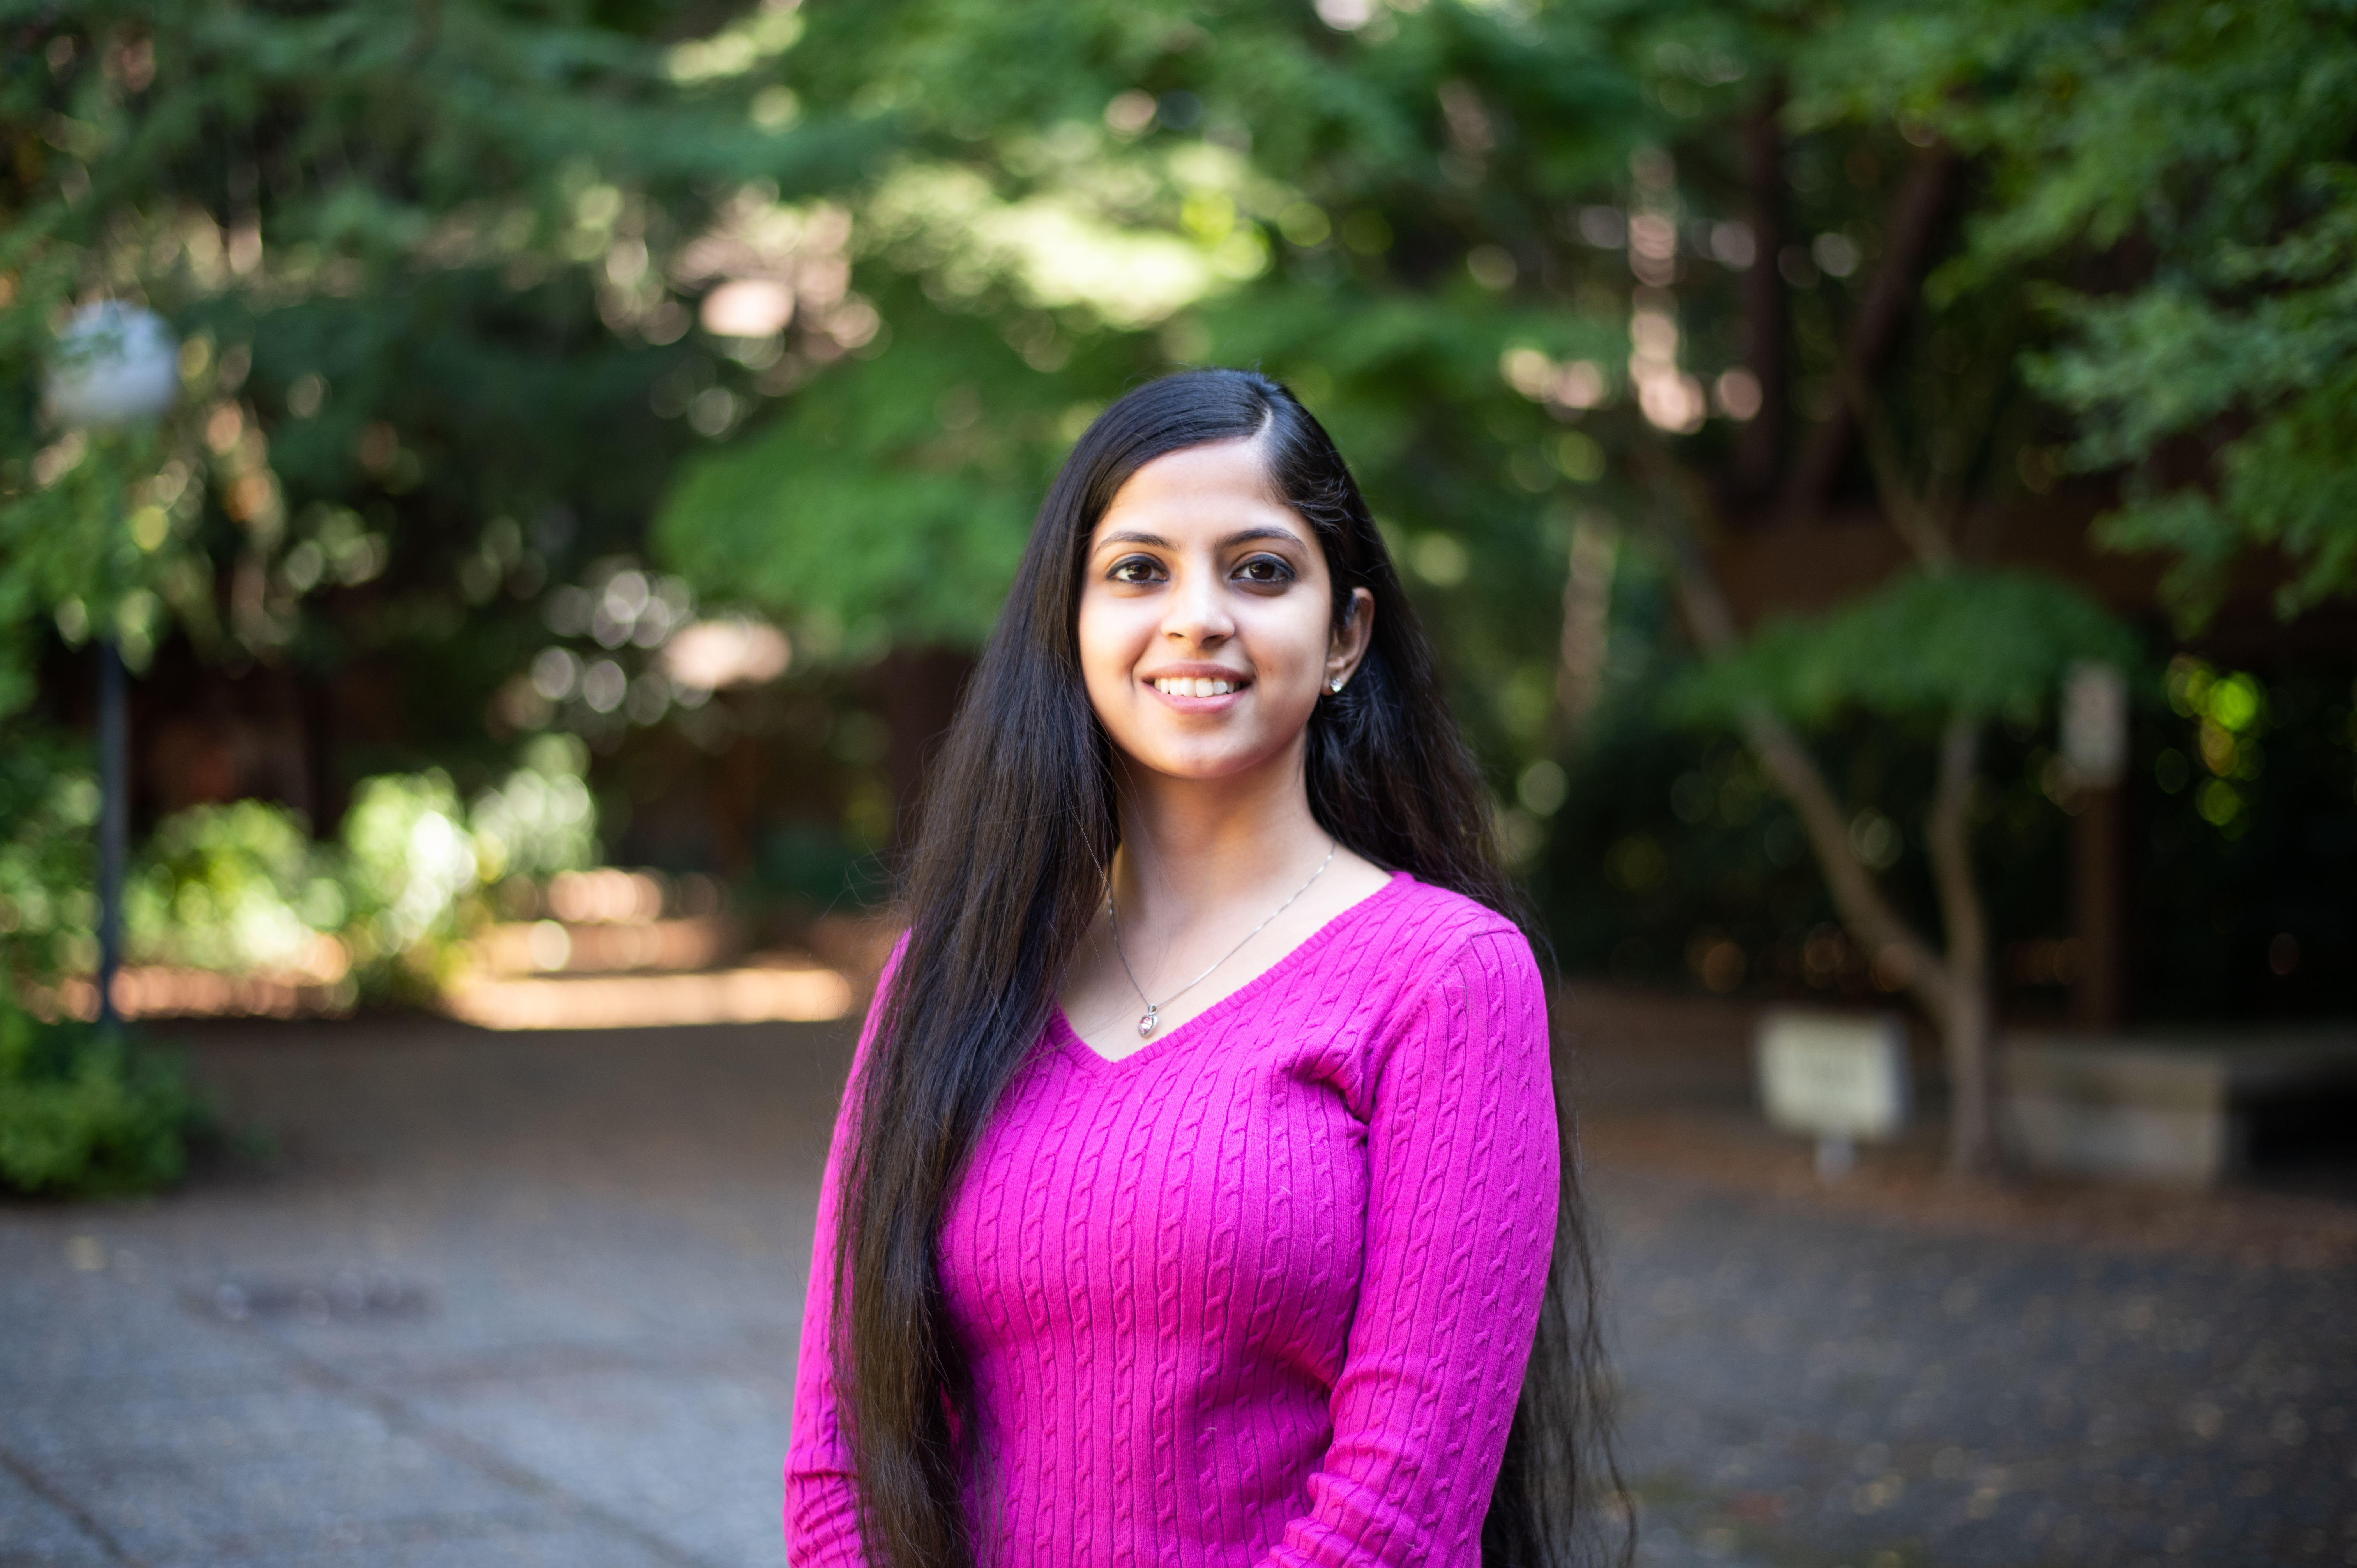 A photo of Anukriti, an asian woman who is smiling at the camera. She is wearing a pink sweater and a pendant around her neck. She has long, black hair parted to one side. The background is blurry, with green trees, indicating this photo was taken outdoors.